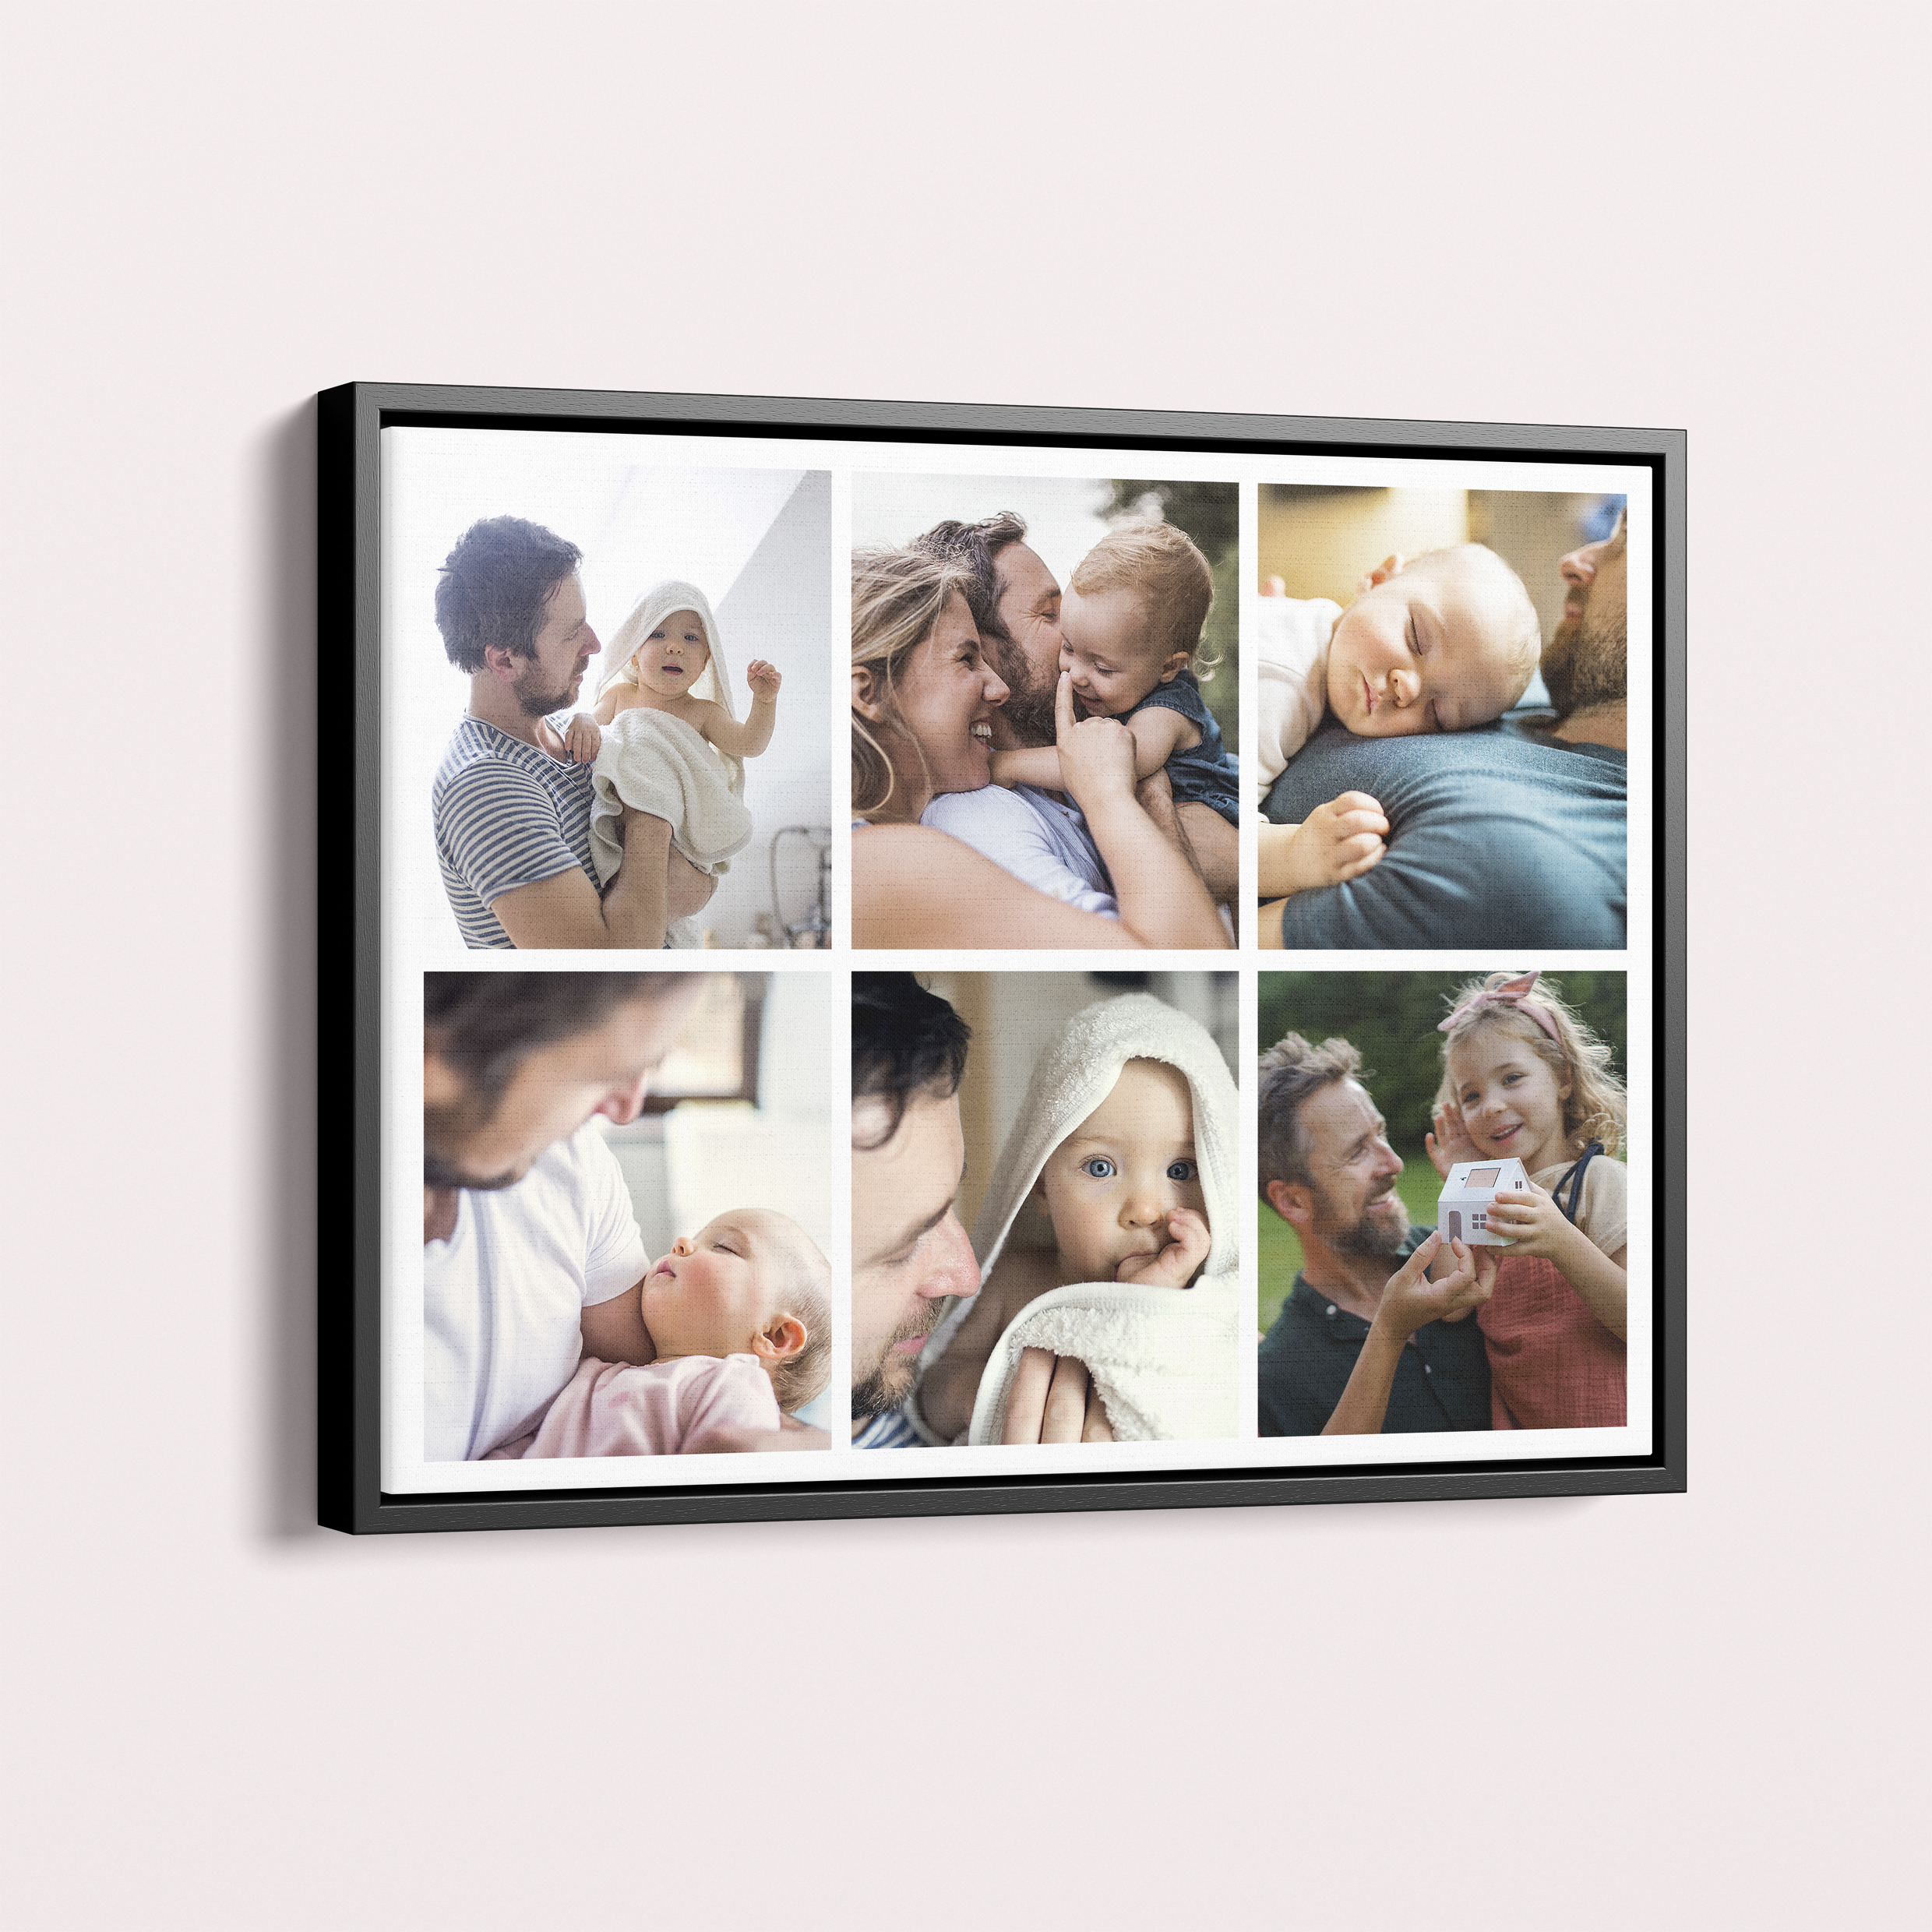  Personalized Moments Mosaic Framed Photo Canvas - A heartfelt gift capturing cherished beauty and shared memories.